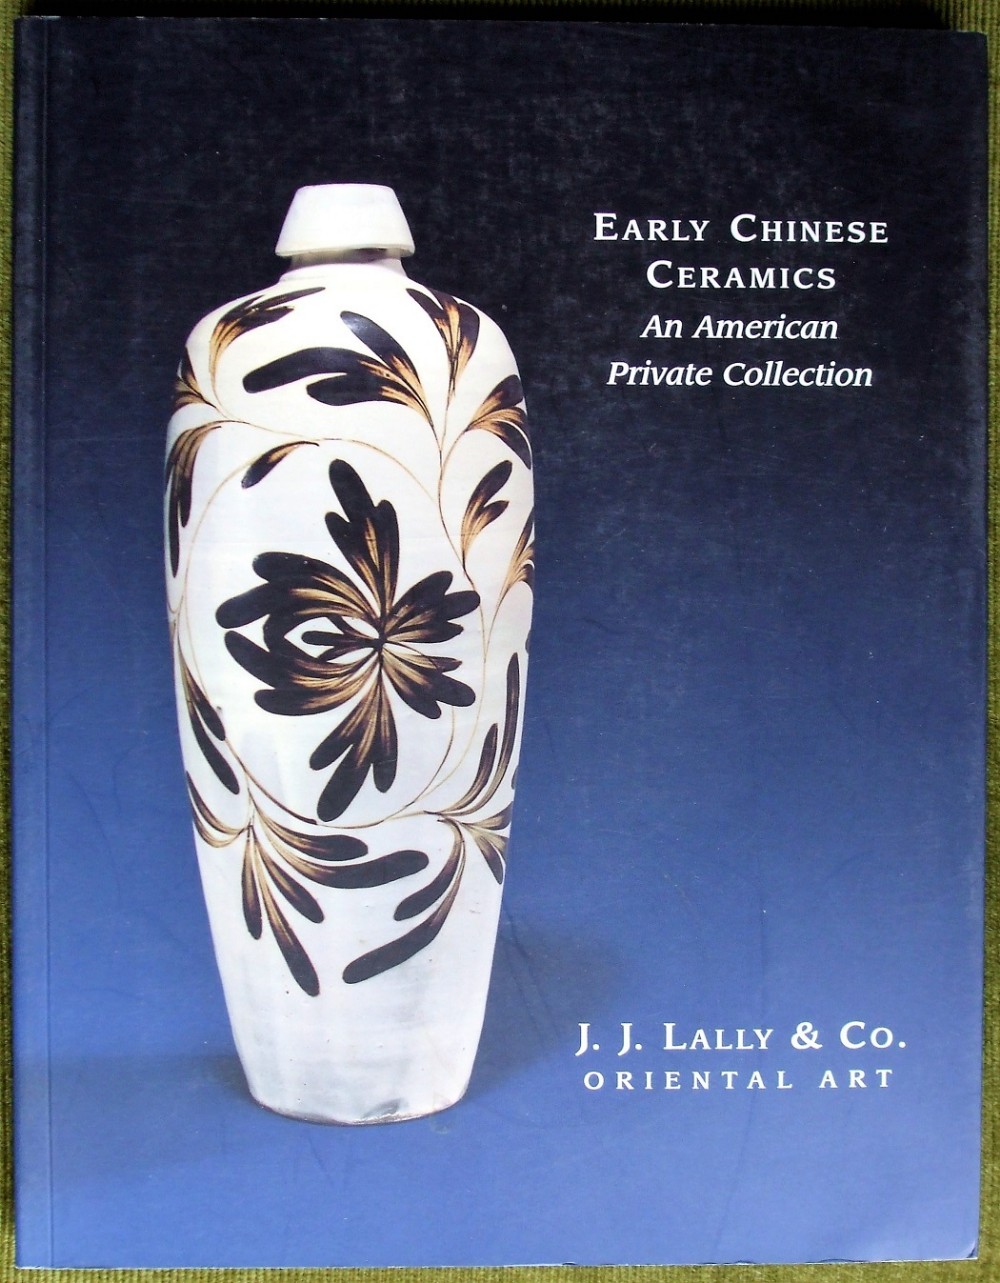 early chinese ceramics an american private collection jj lally co oriental art new york march 28th to april 16th 2005